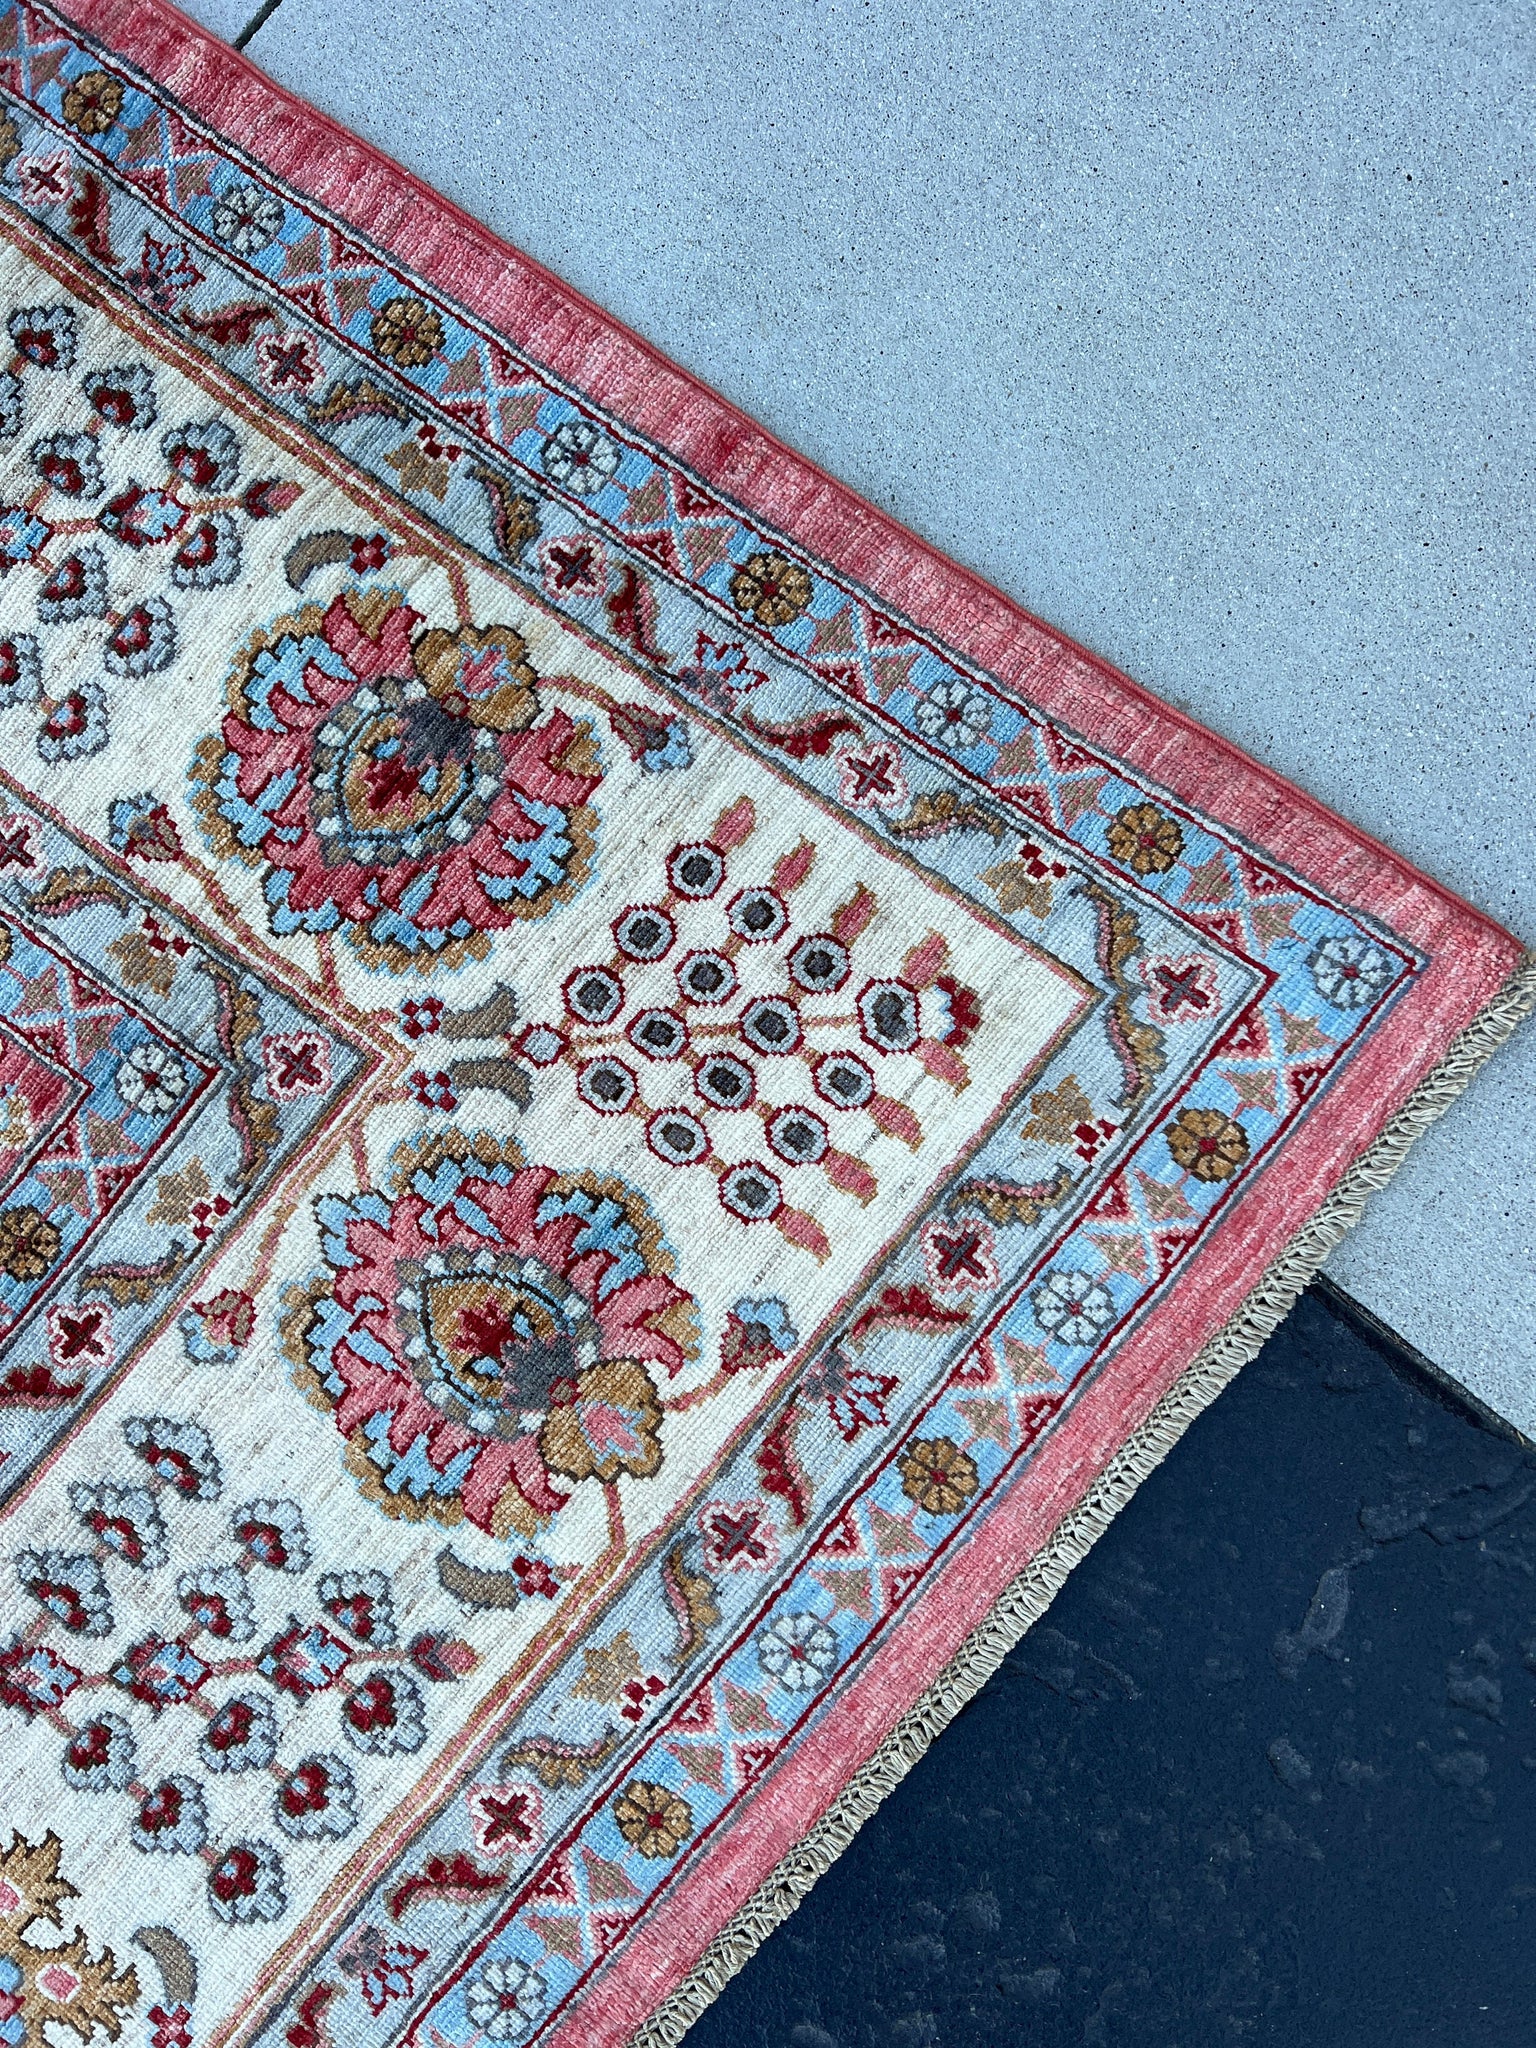 9x12 Fair Trade Hand-Knotted Afghan Rug | Salmon Pink Coral Beige Brown Sky Baby Blue Cream Ivory Maroon Red | Persian Wool Knotted Woolen